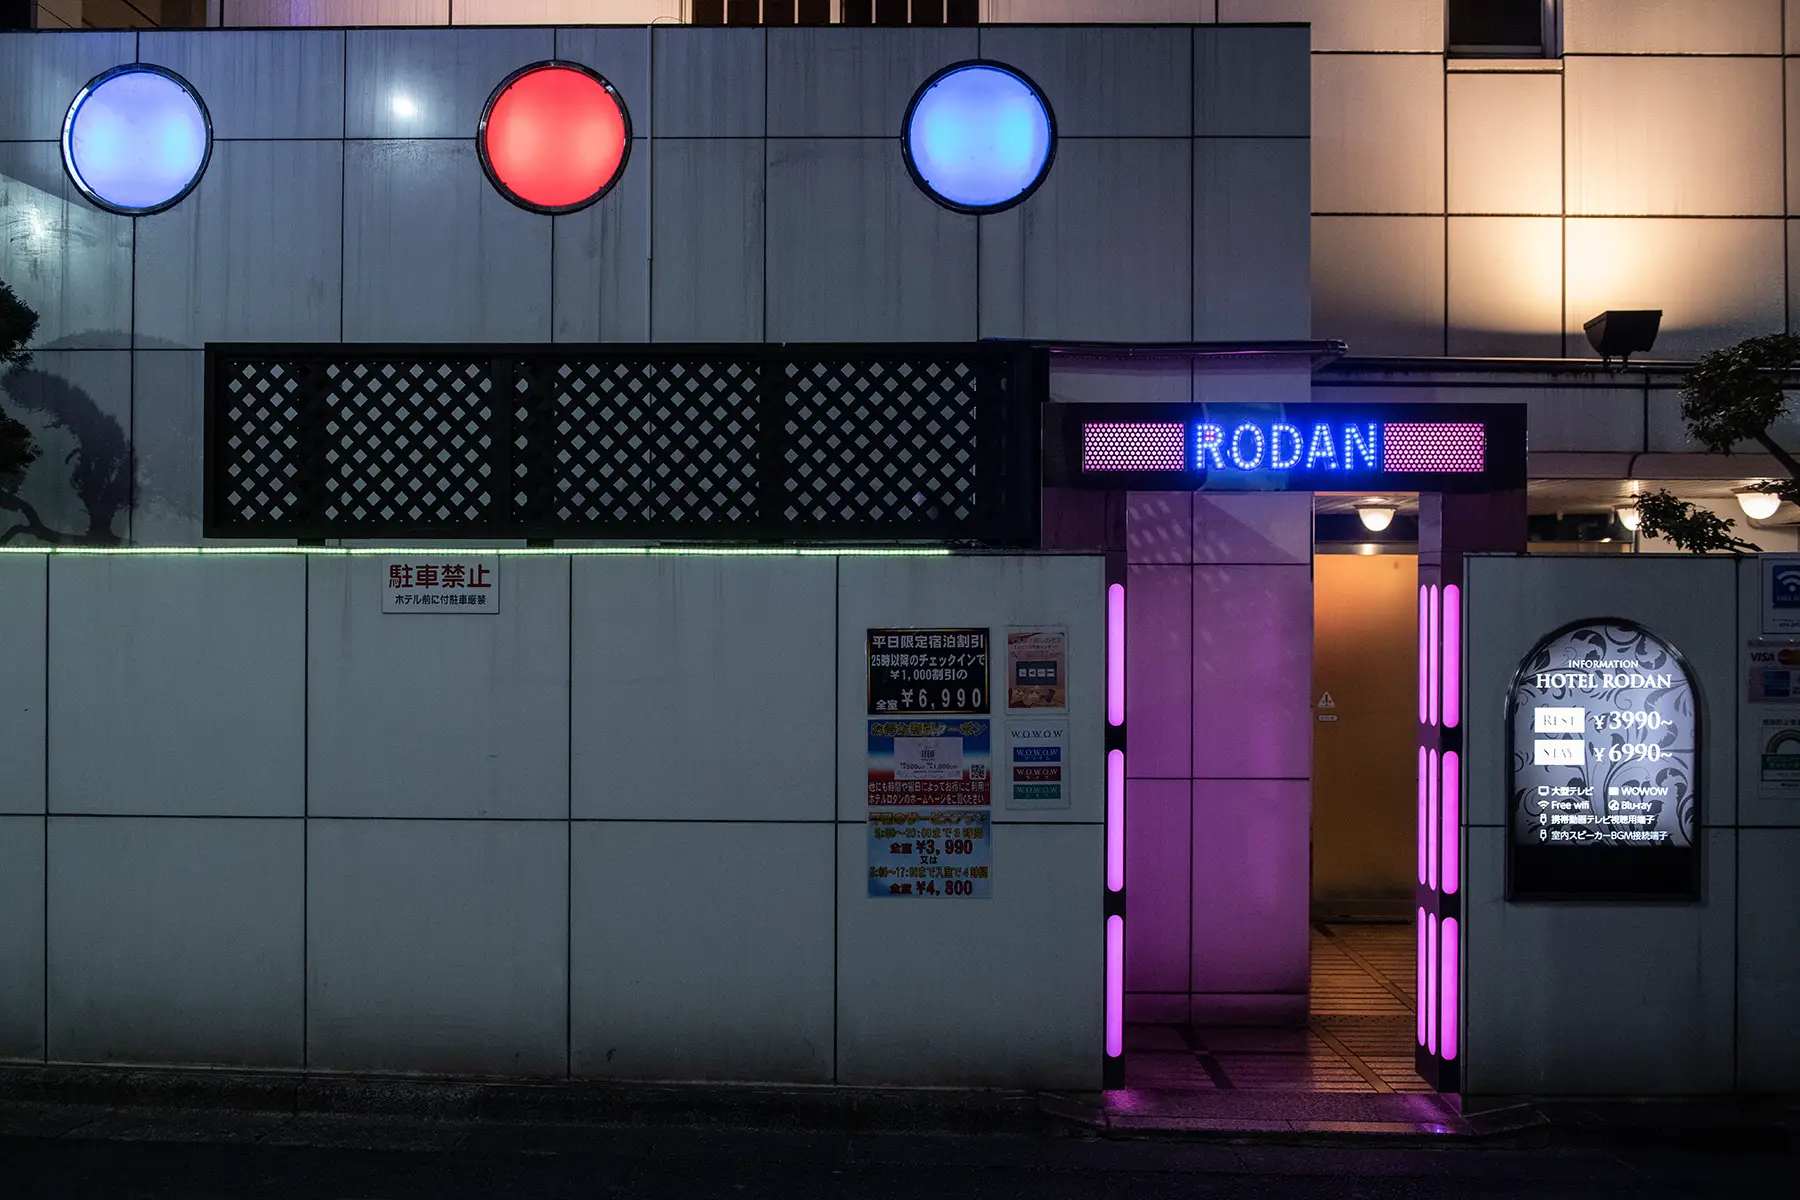 A dark building with red and blue neon lights